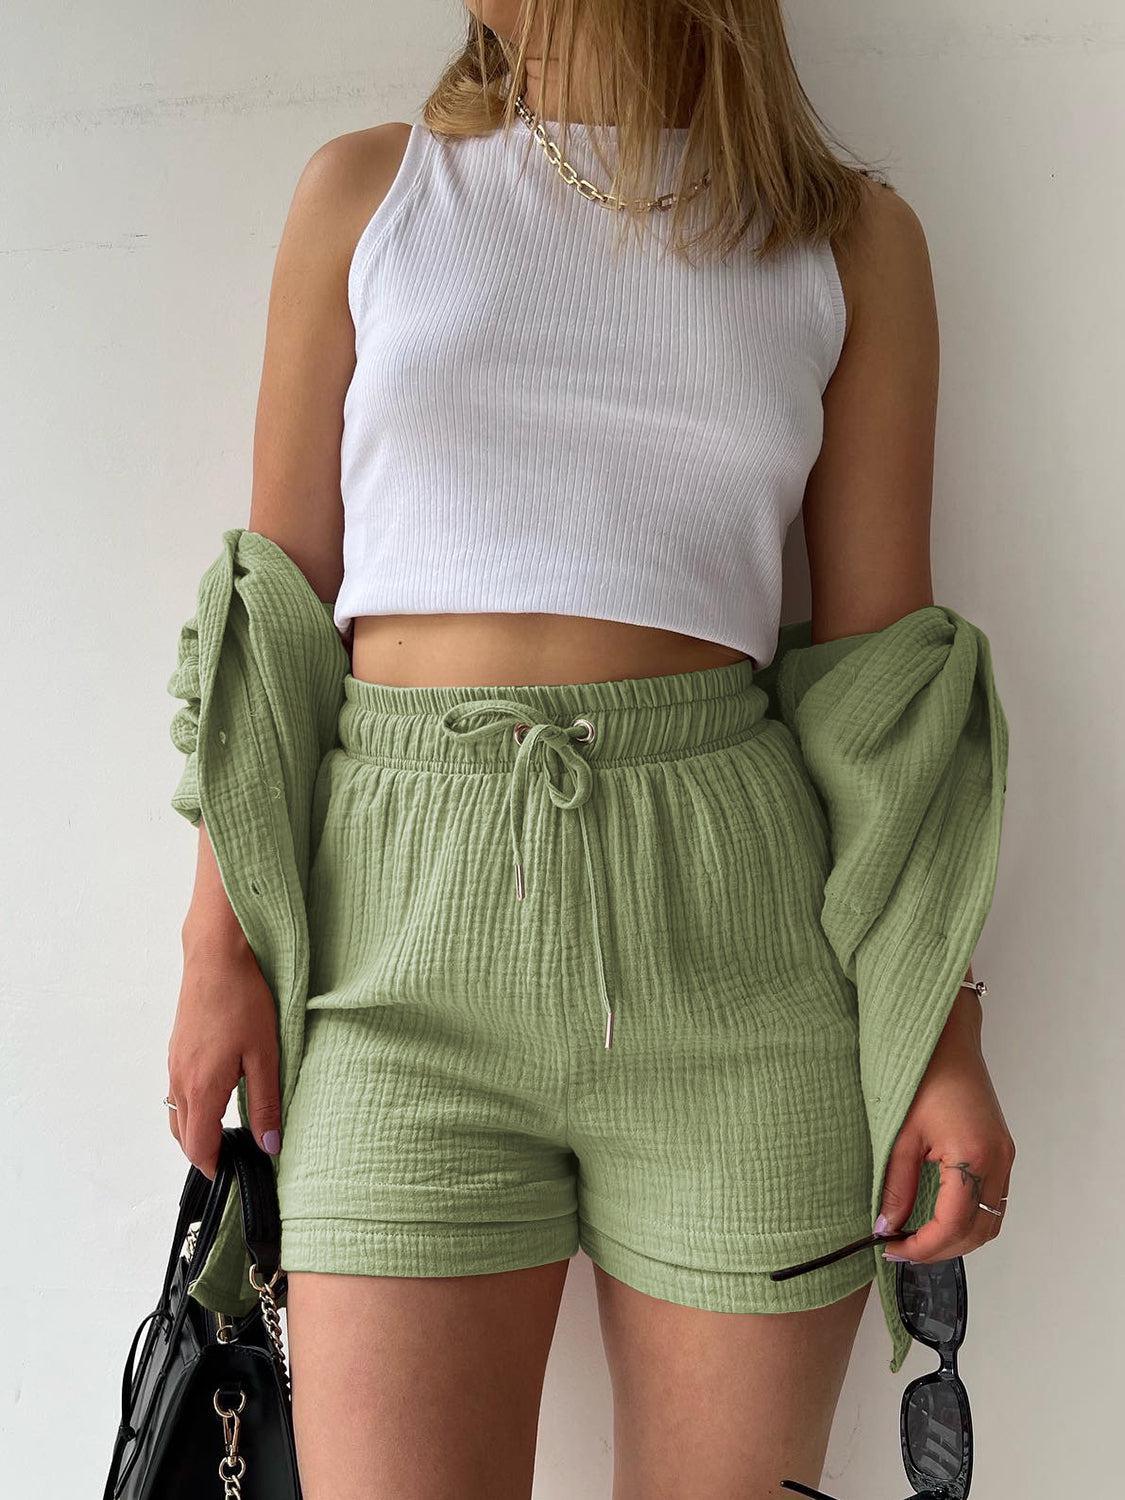 a woman wearing green shorts and a white top